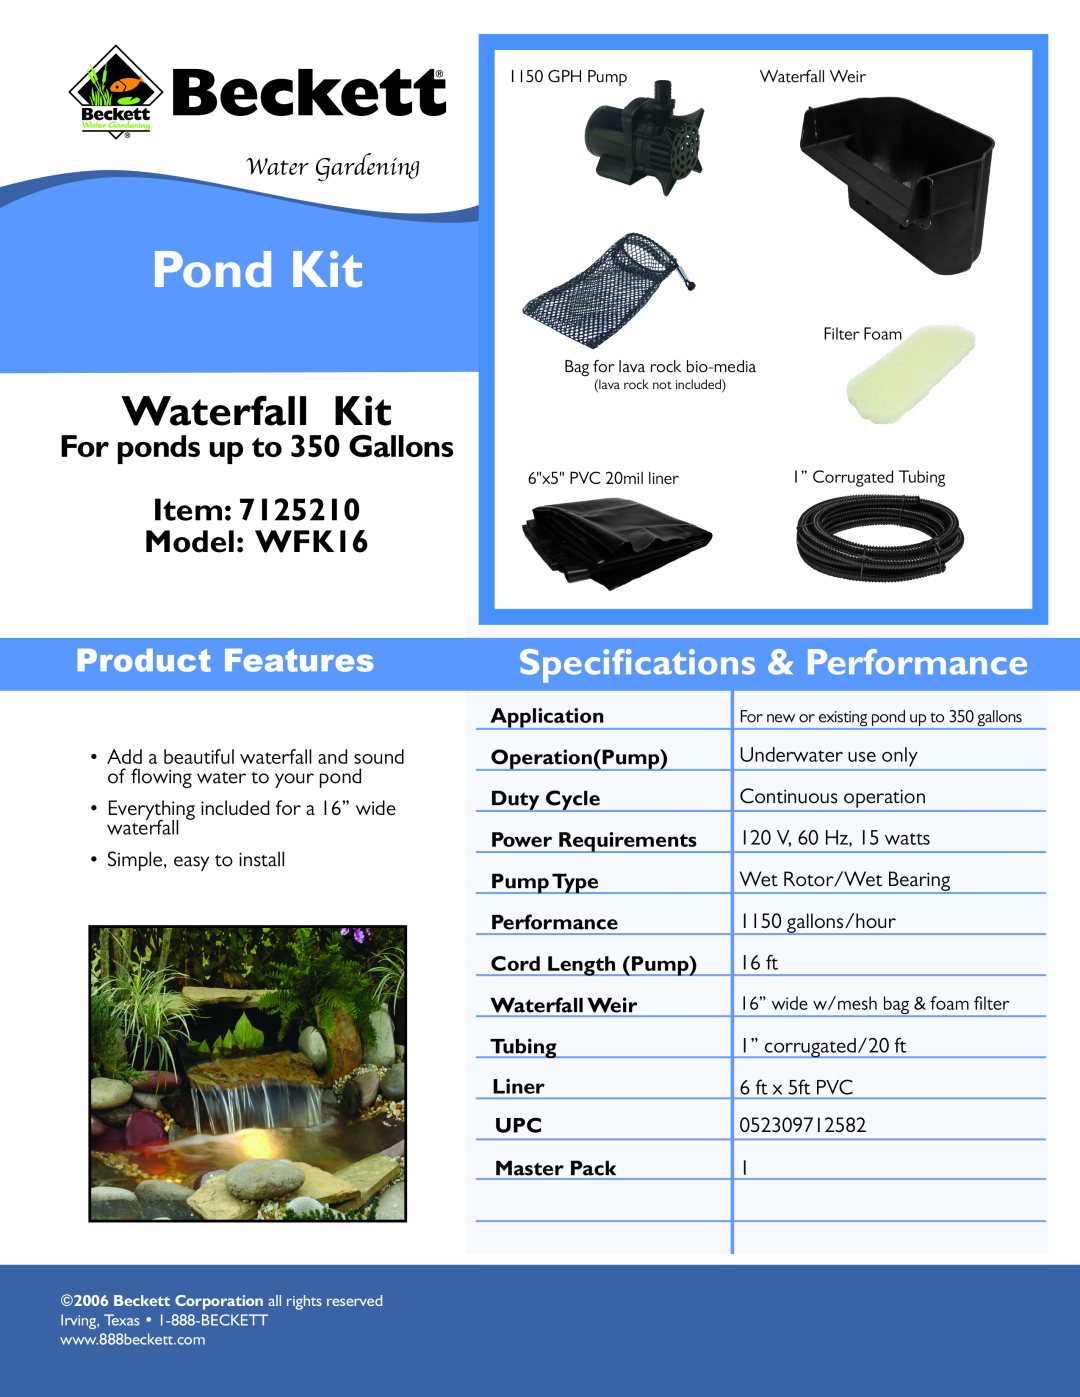 Beckett Water Gardening specifications Pond Kit, Waterfall Kit, Speciﬁcations & Performance, Item Model WFK16 